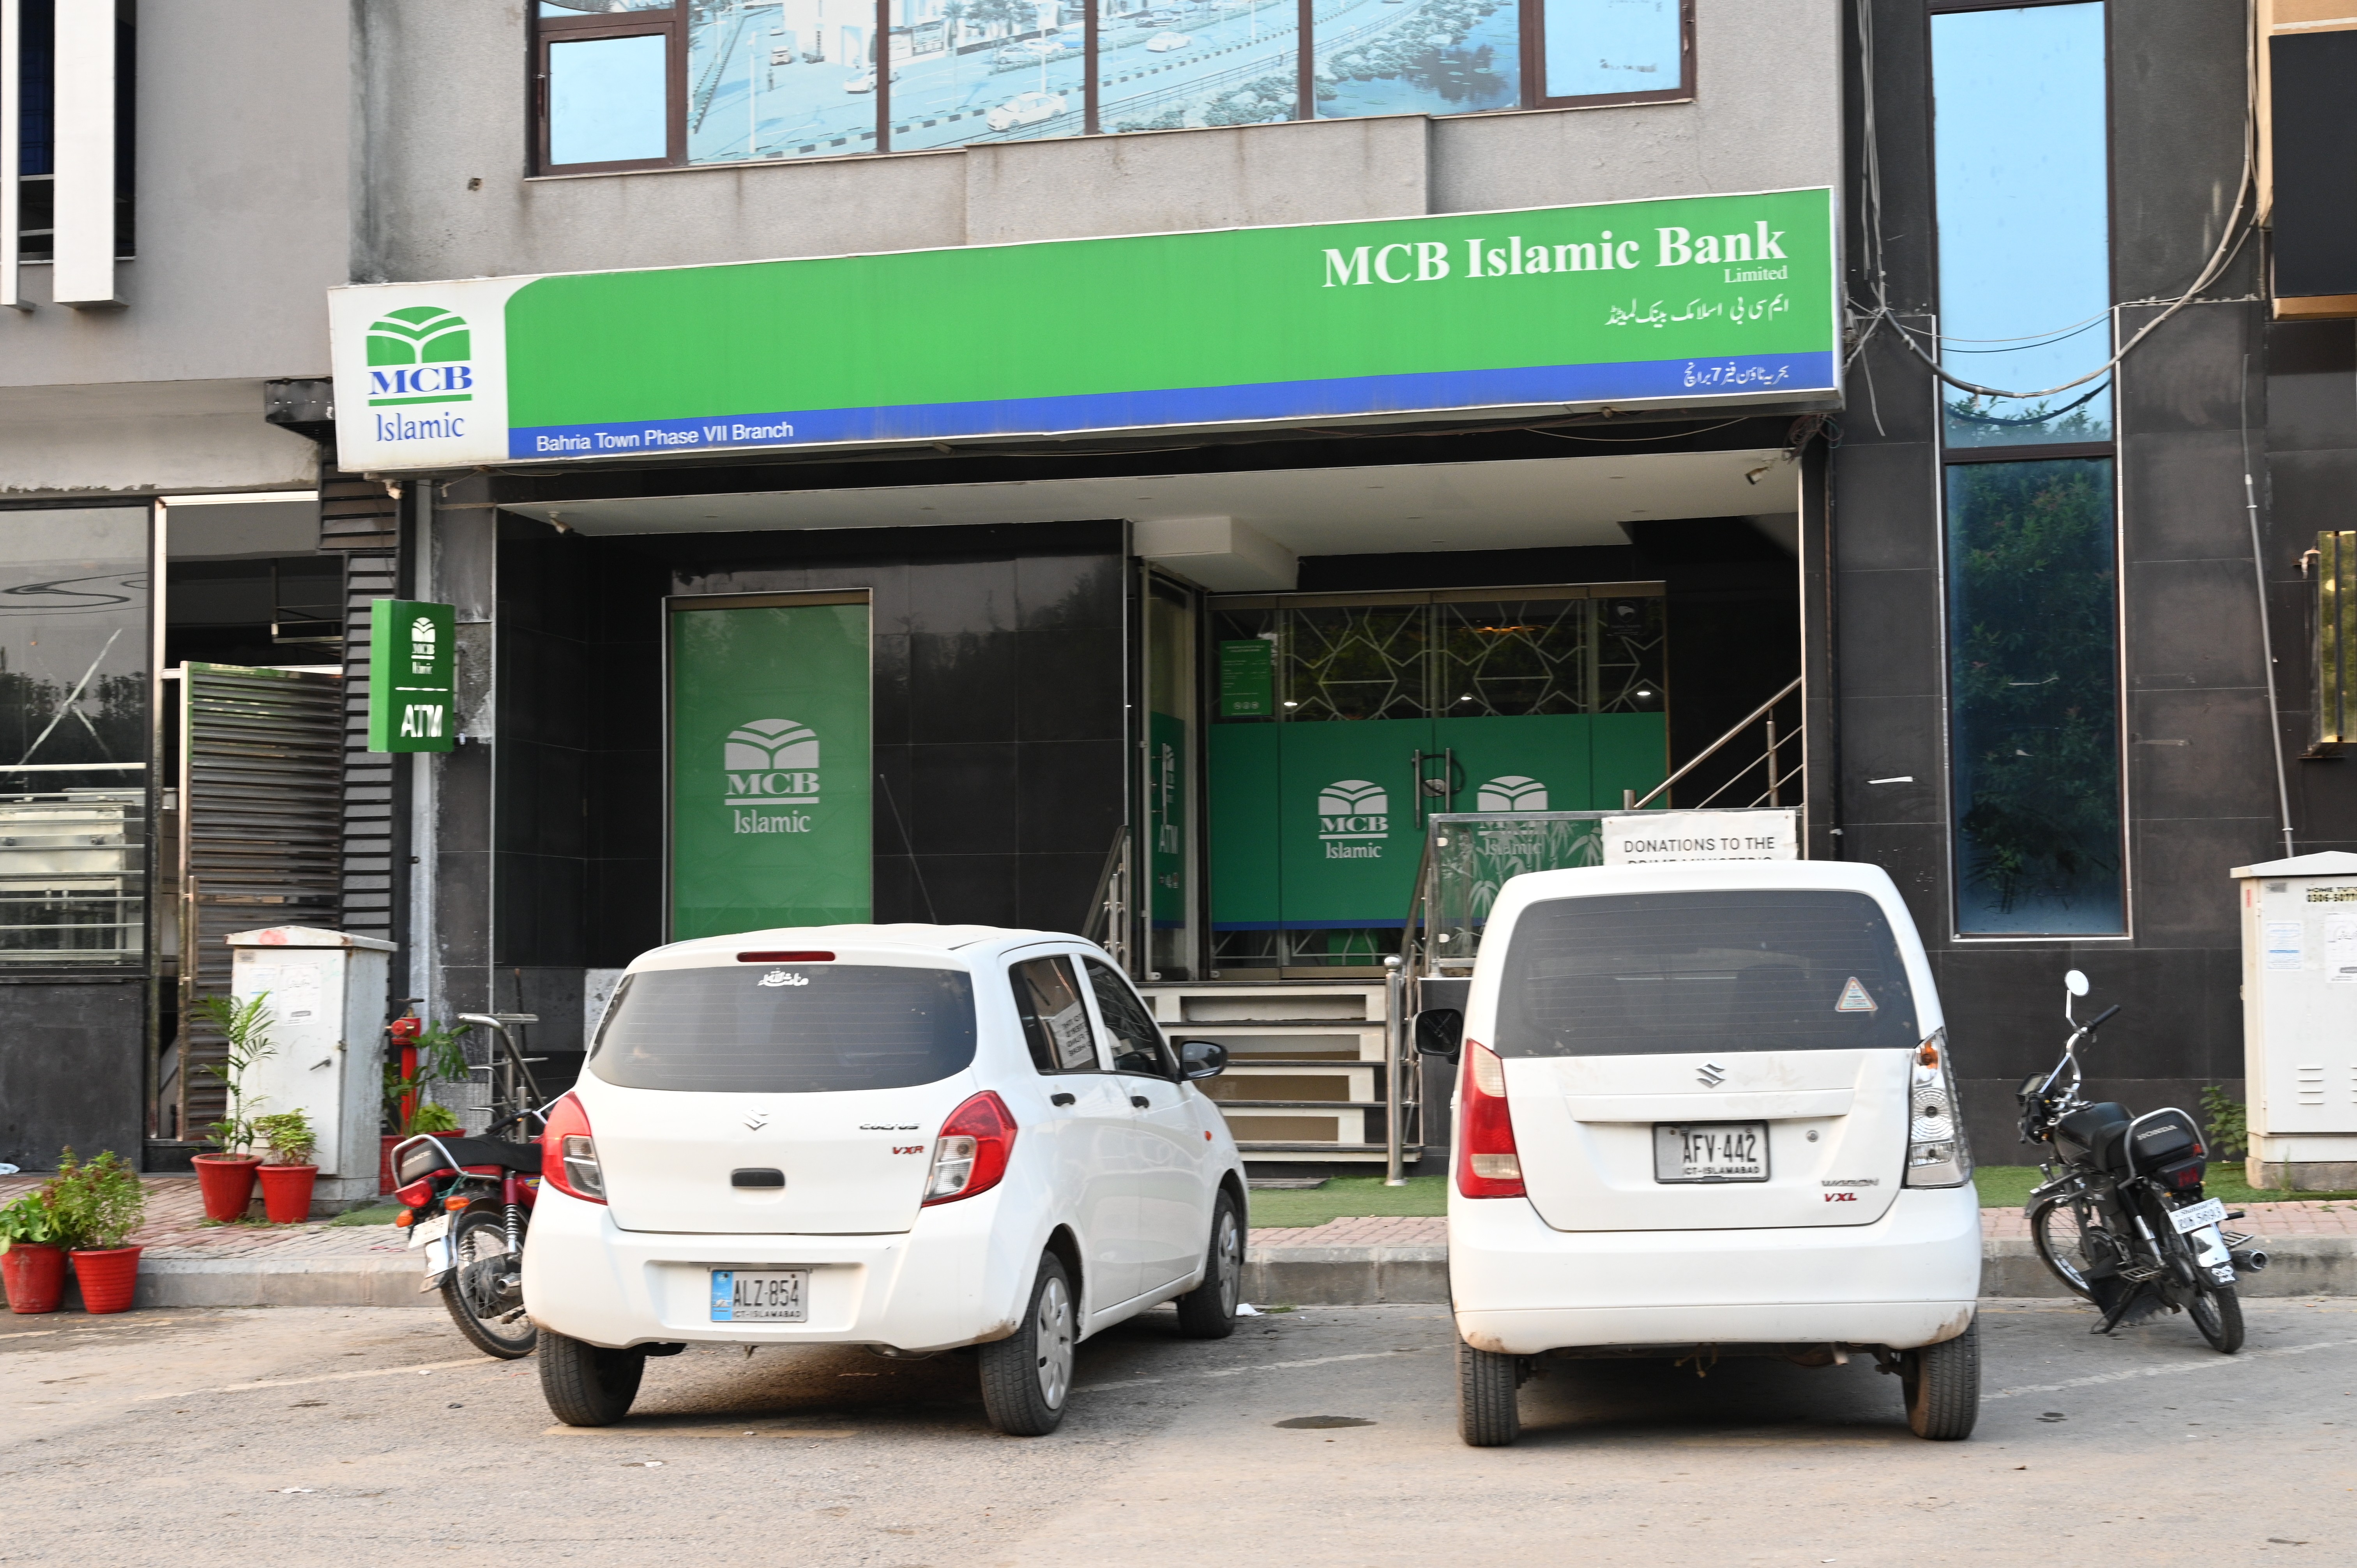 MCB Islamic Bank Limited, Bahria Town Phase VII Branch